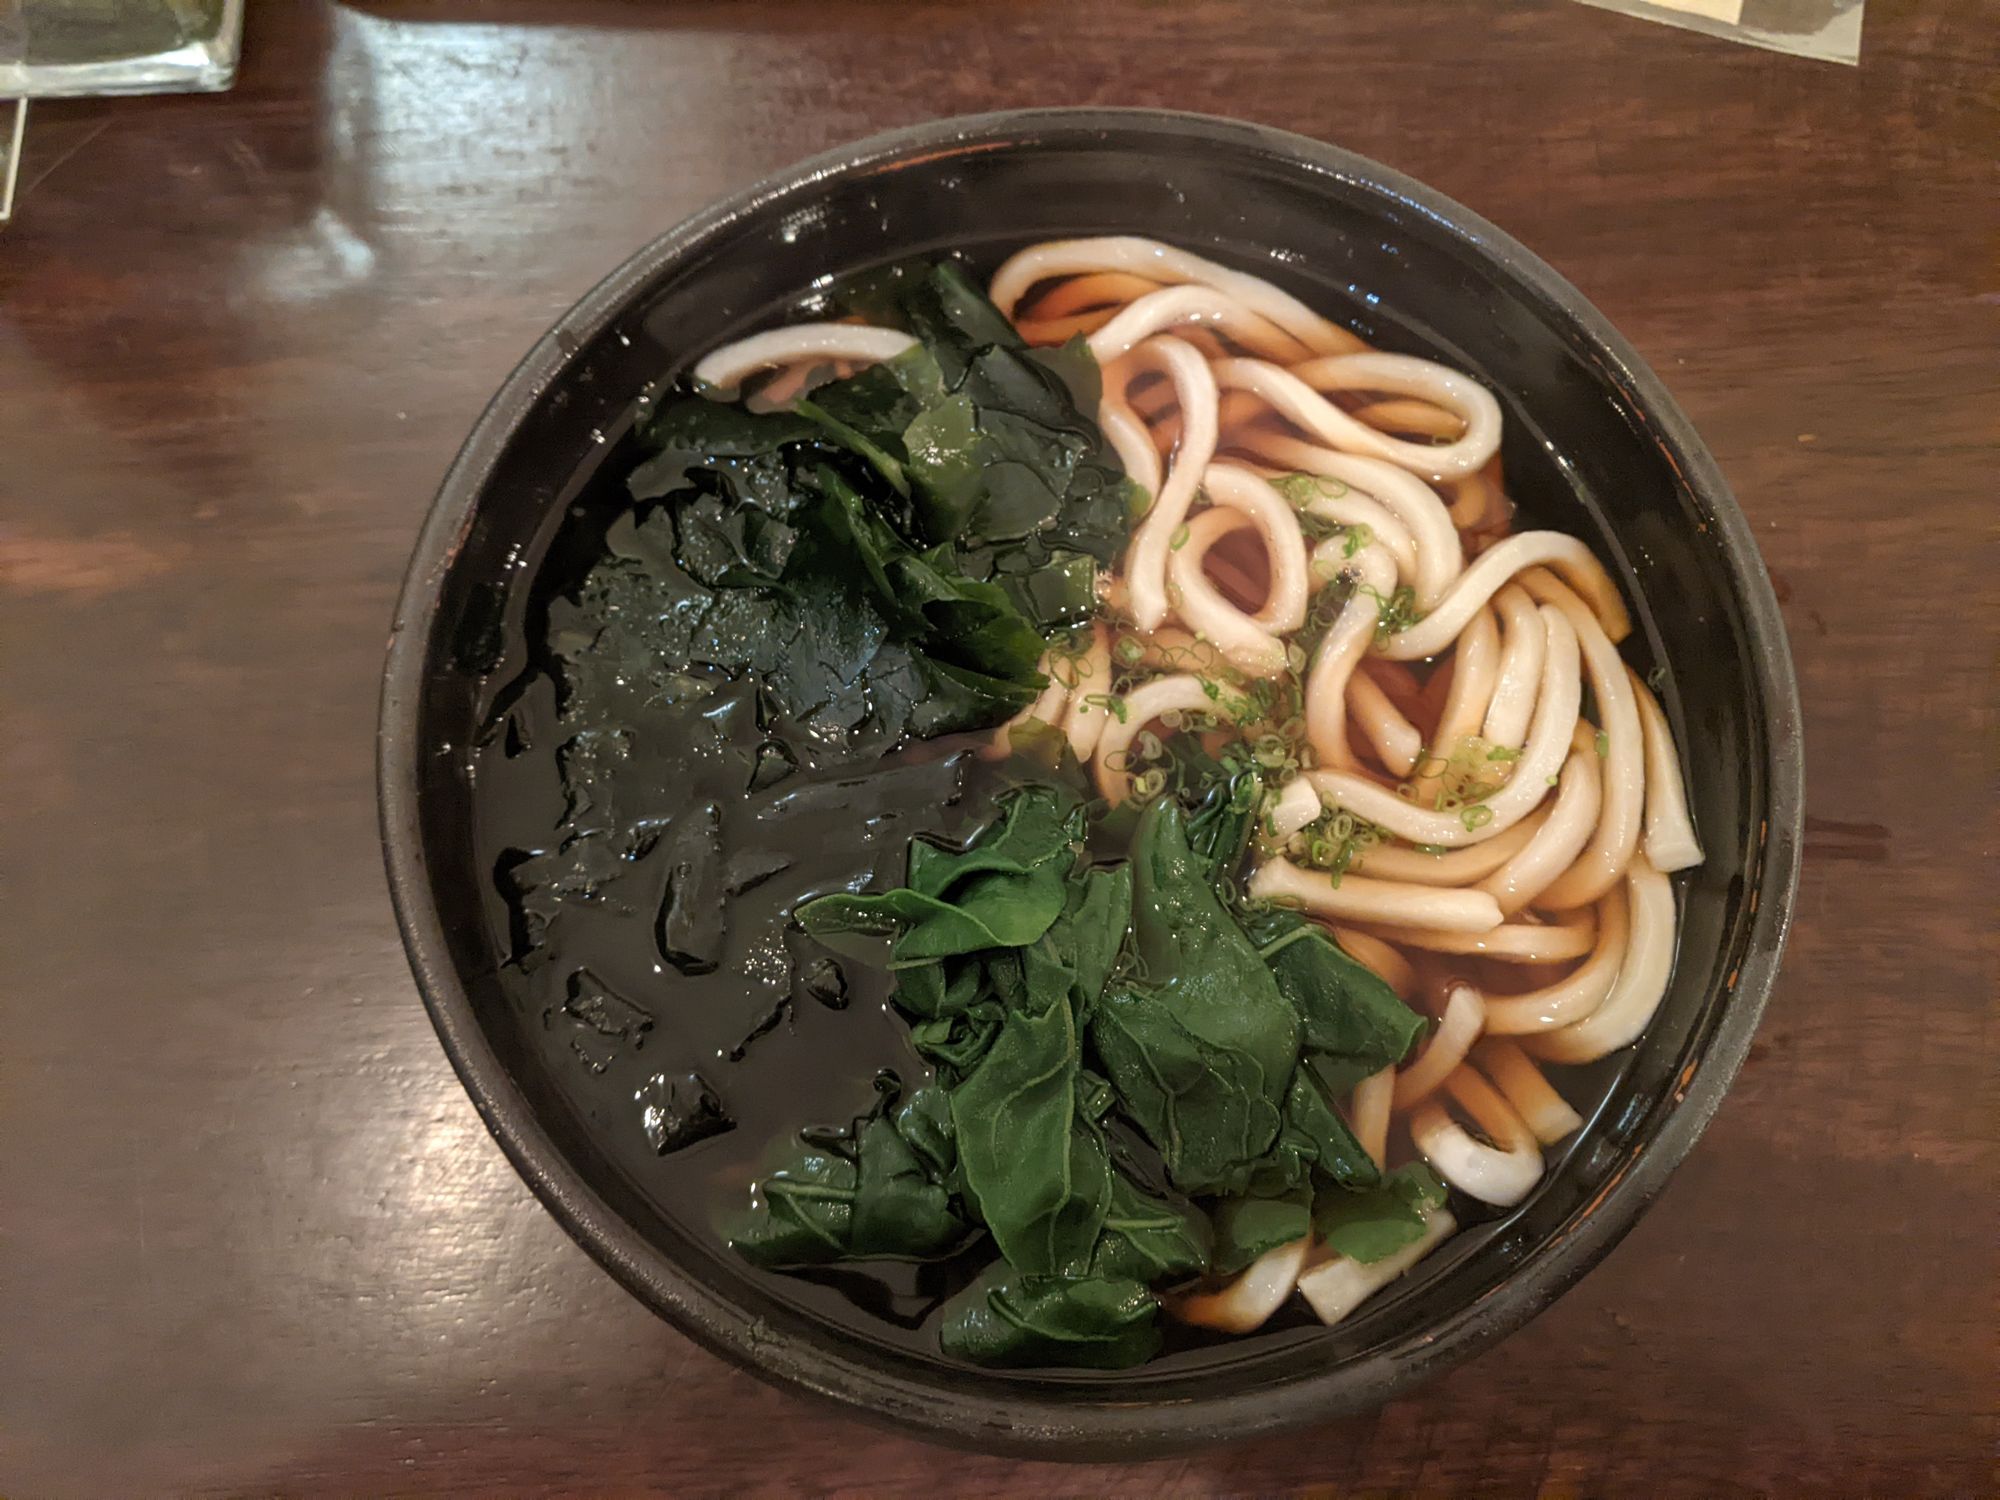 My dinner, Wakame-Udon.